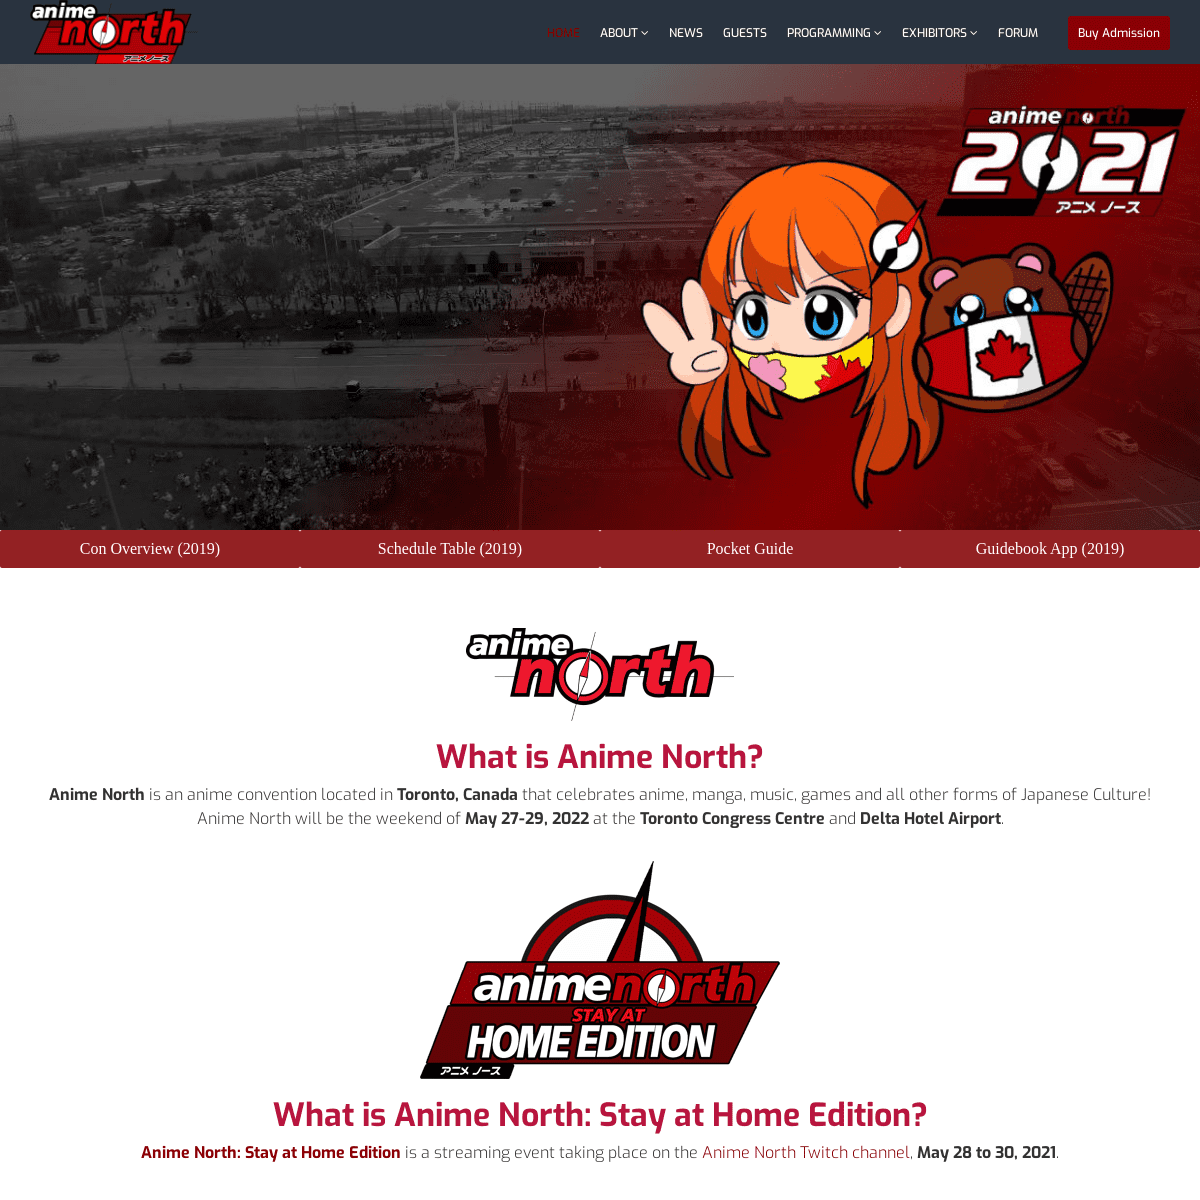 A complete backup of https://animenorth.com